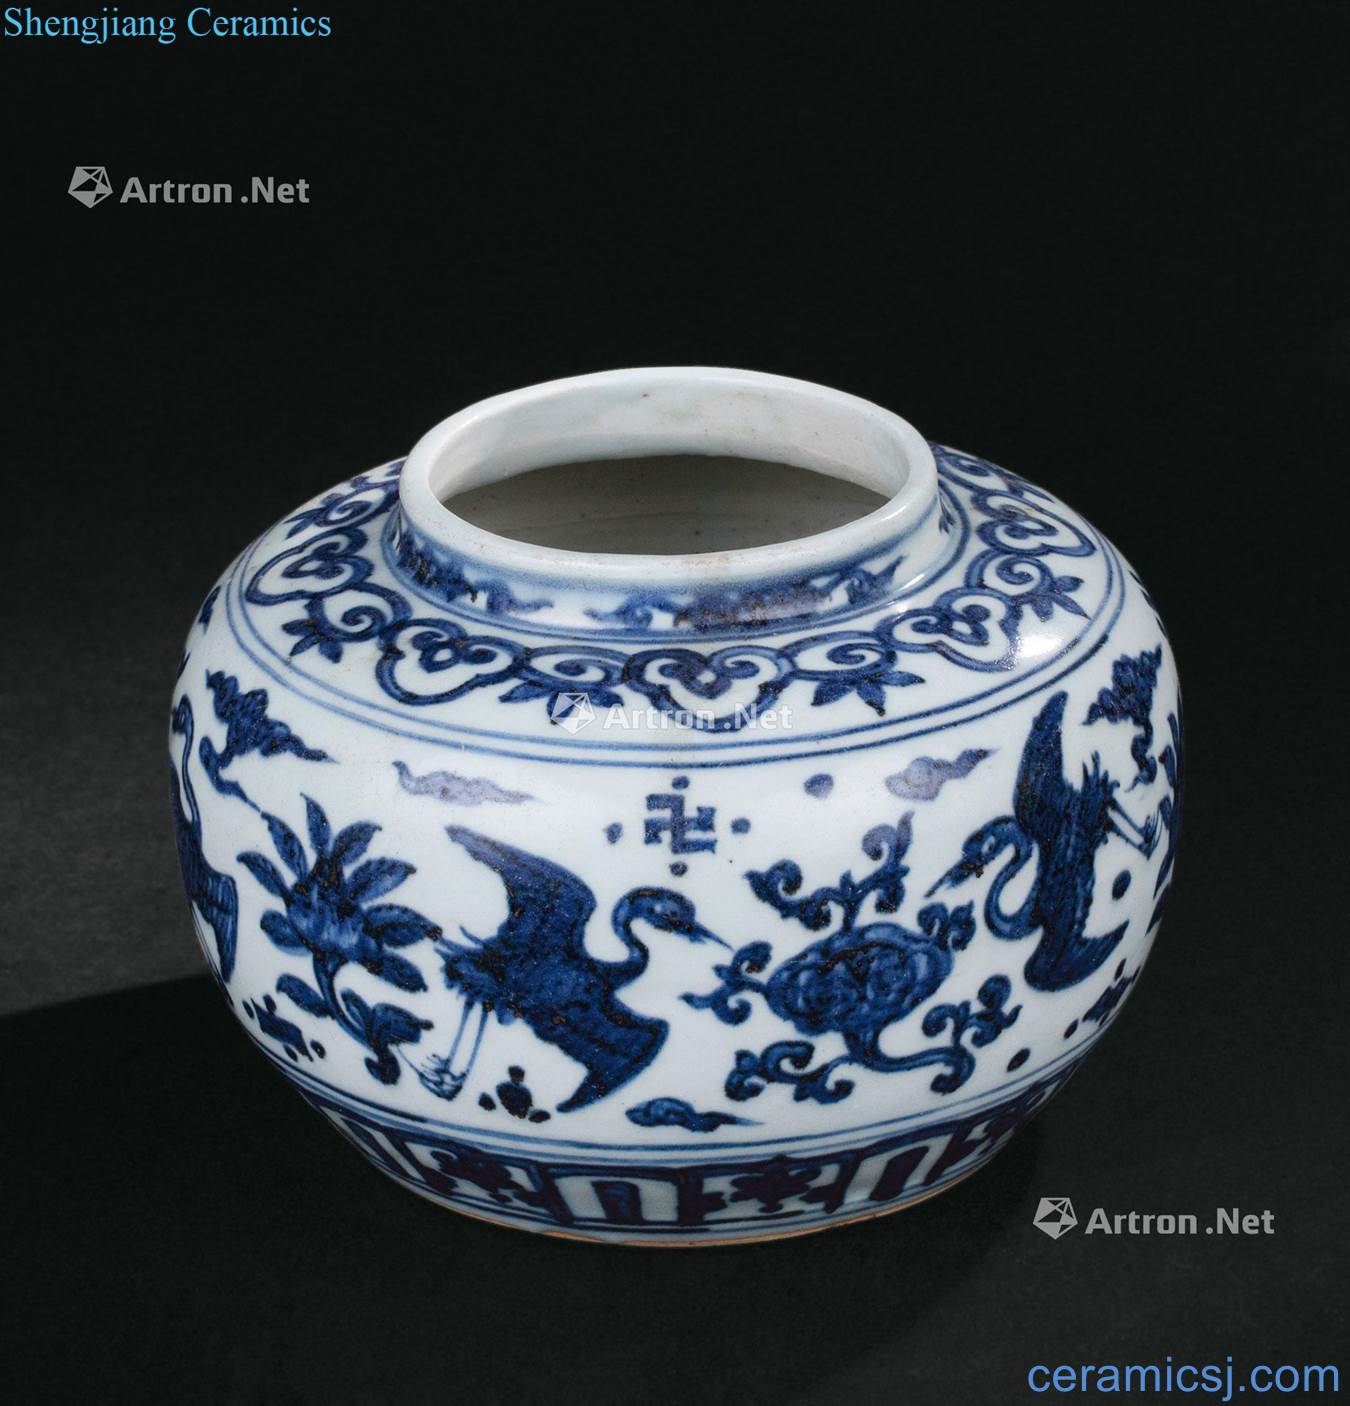 In the Ming dynasty (1368-1644) blue and white James t. c. na was published grain pot